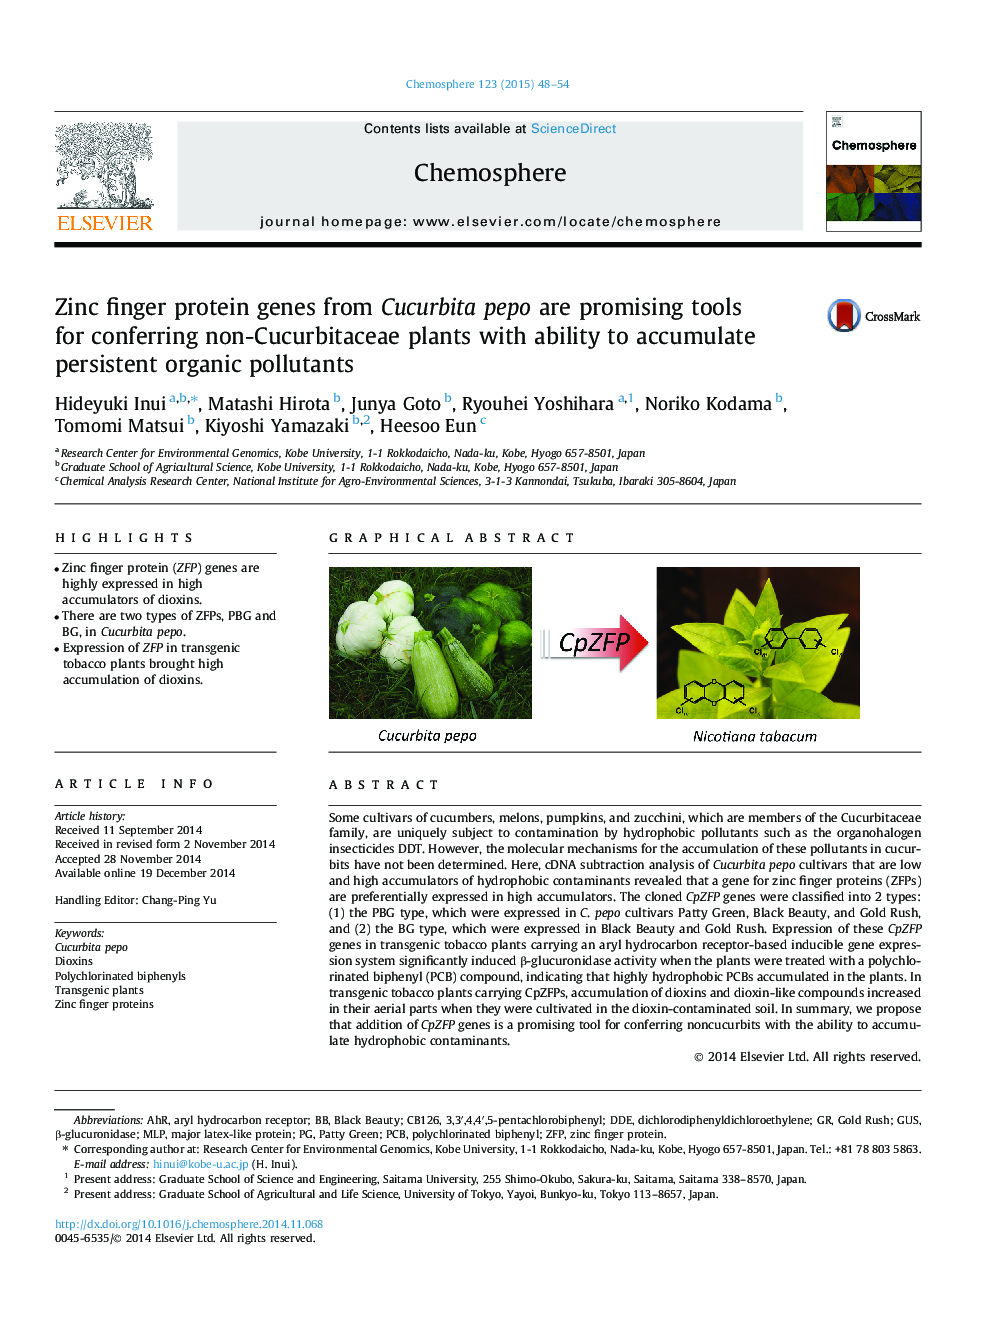 Zinc finger protein genes from Cucurbita pepo are promising tools for conferring non-Cucurbitaceae plants with ability to accumulate persistent organic pollutants